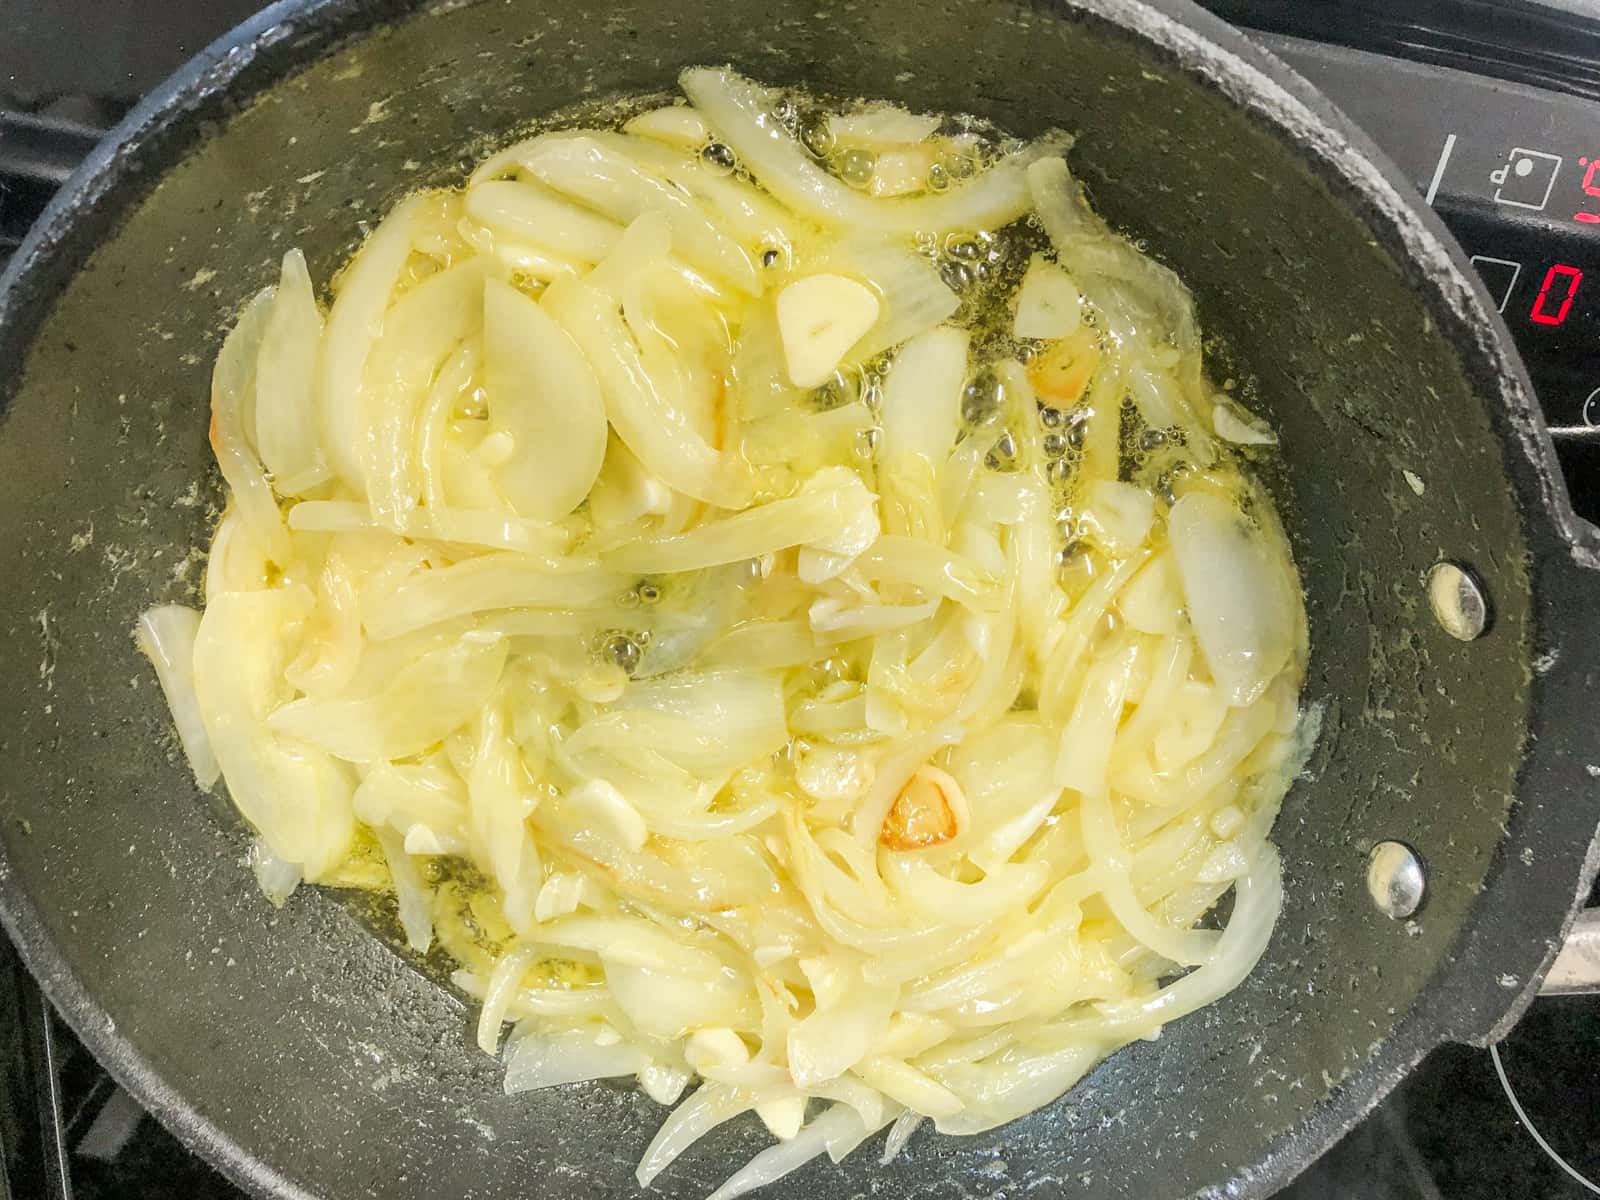 Sliced onions and garlic cooked down until golden in butter.